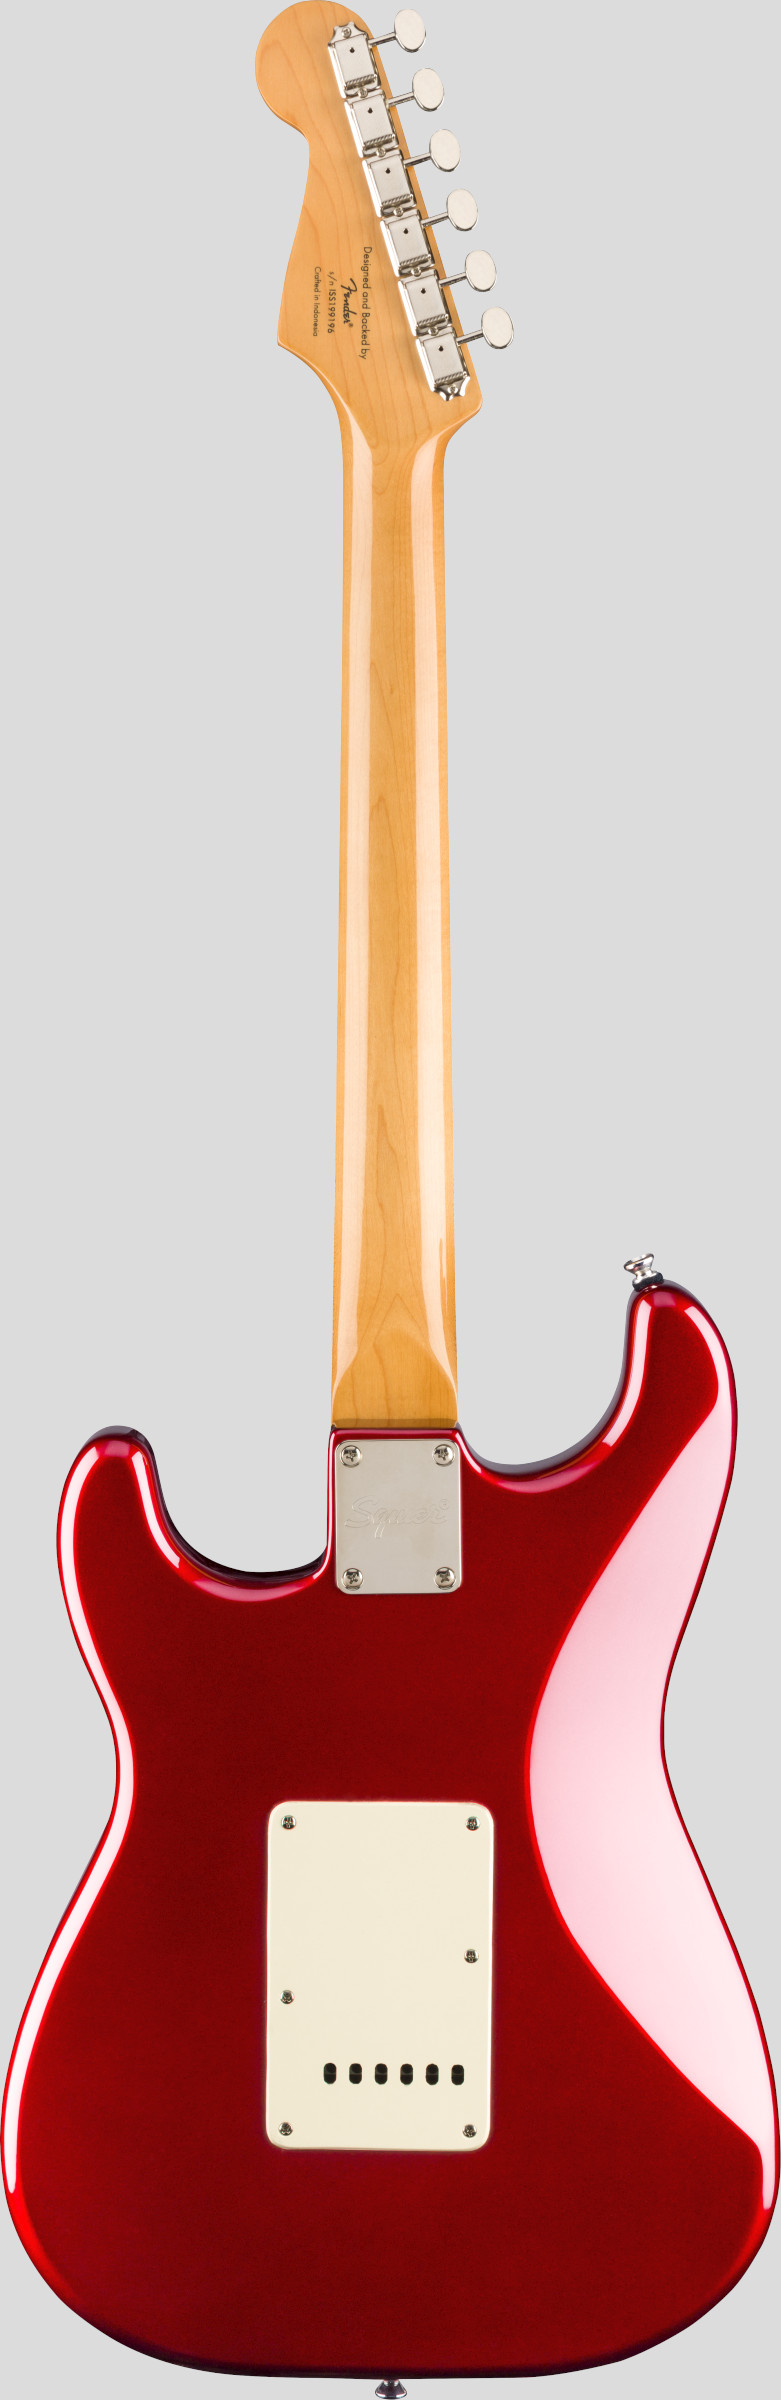 Squier by Fender Classic Vibe 60 Stratocaster Candy Apple Red 2